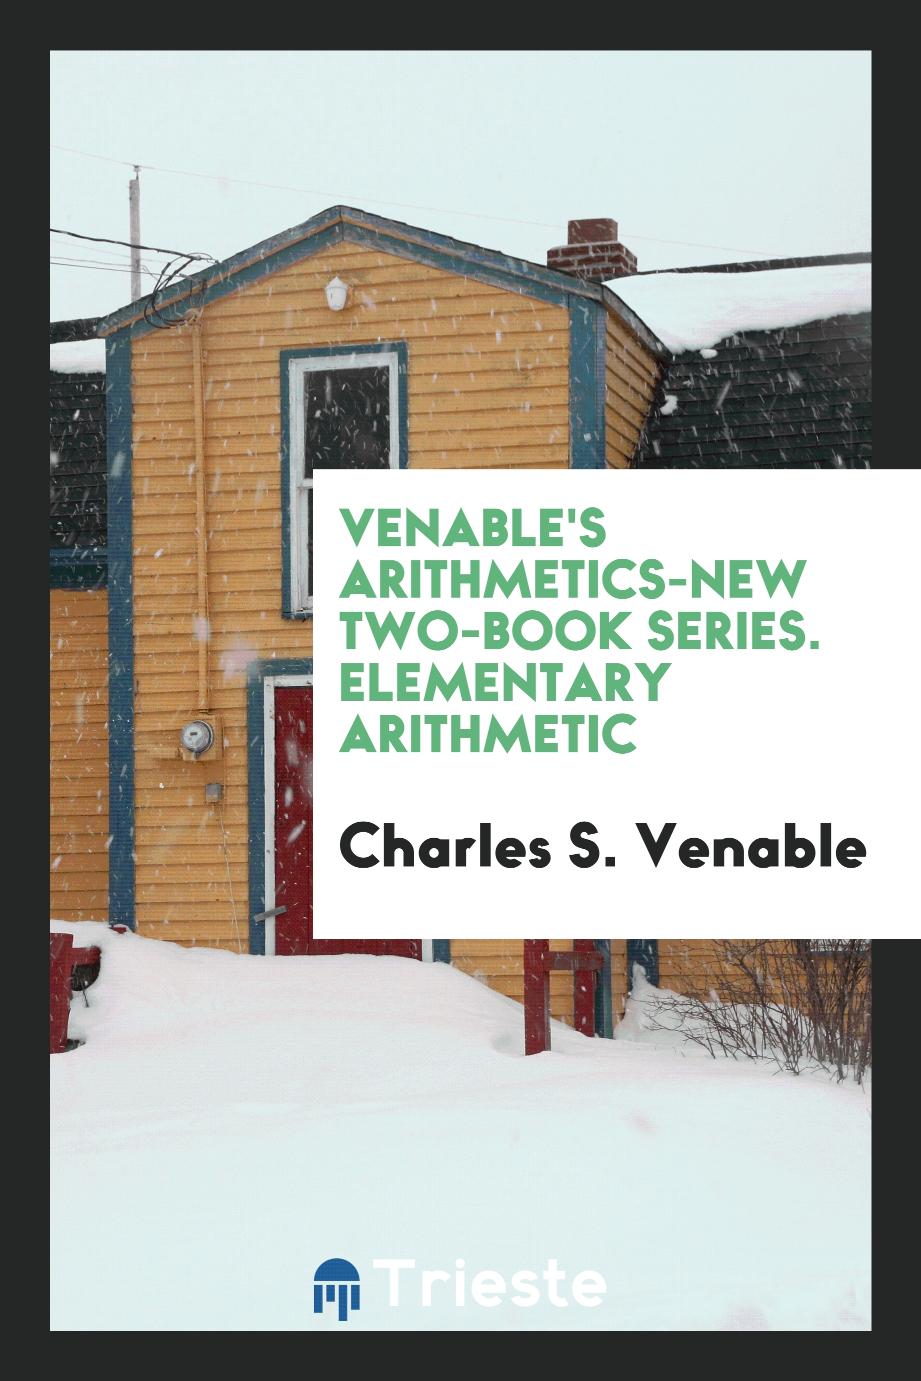 Venable's Arithmetics-New Two-Book Series. Elementary Arithmetic